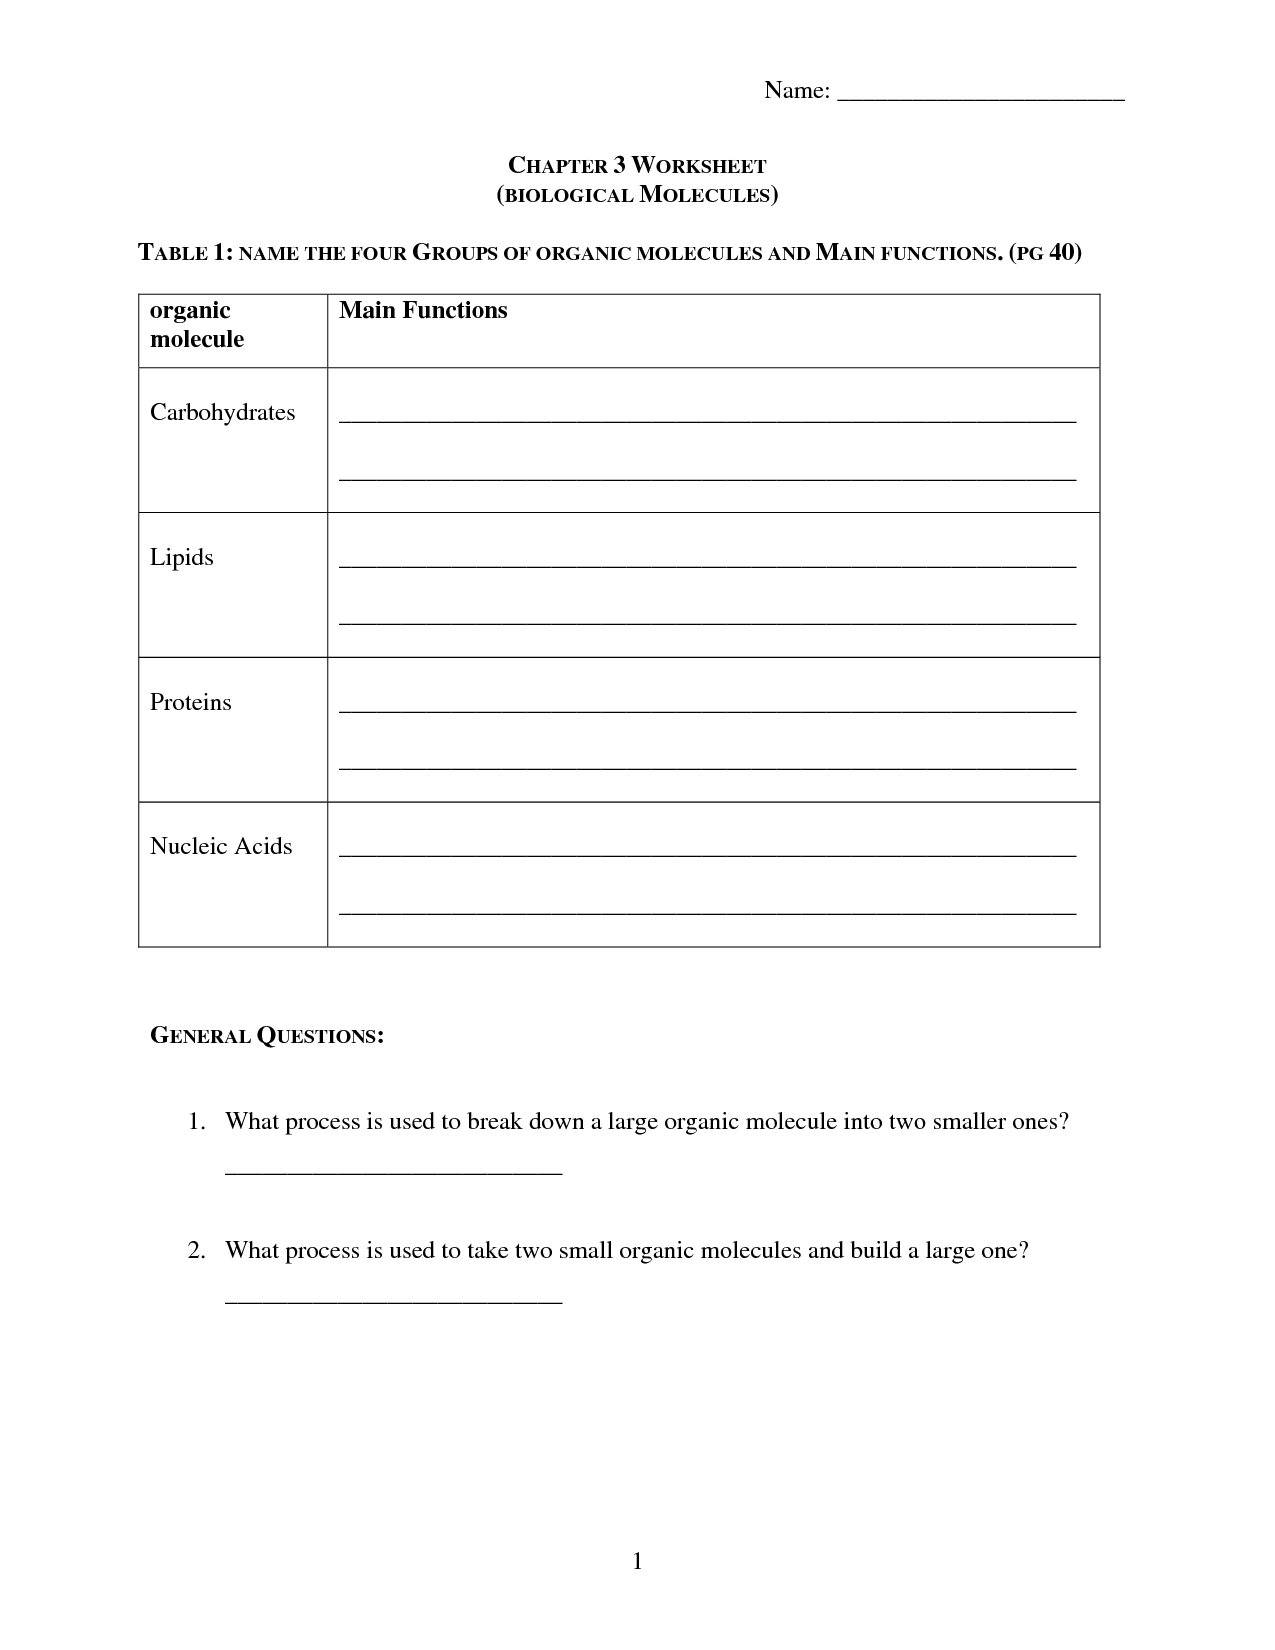 14-best-images-of-carbohydrates-lipids-and-proteins-worksheet-organic-molecules-worksheet